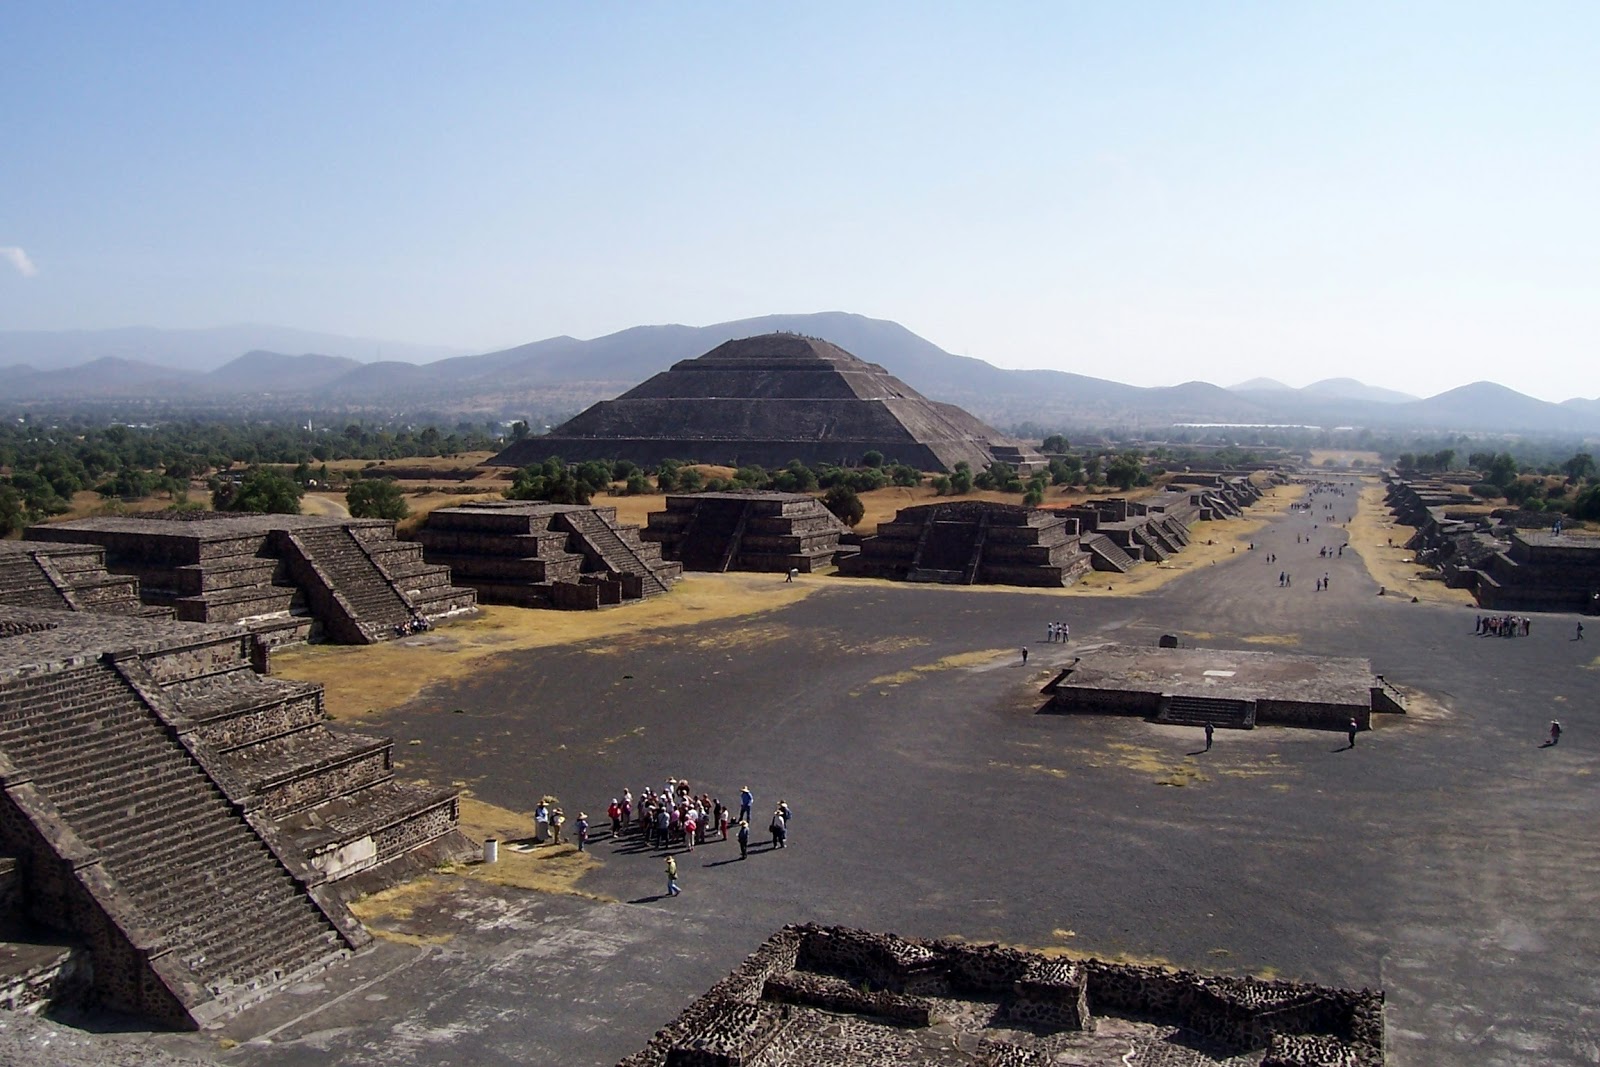 The Pyramids of Teotihuacan in Mexico